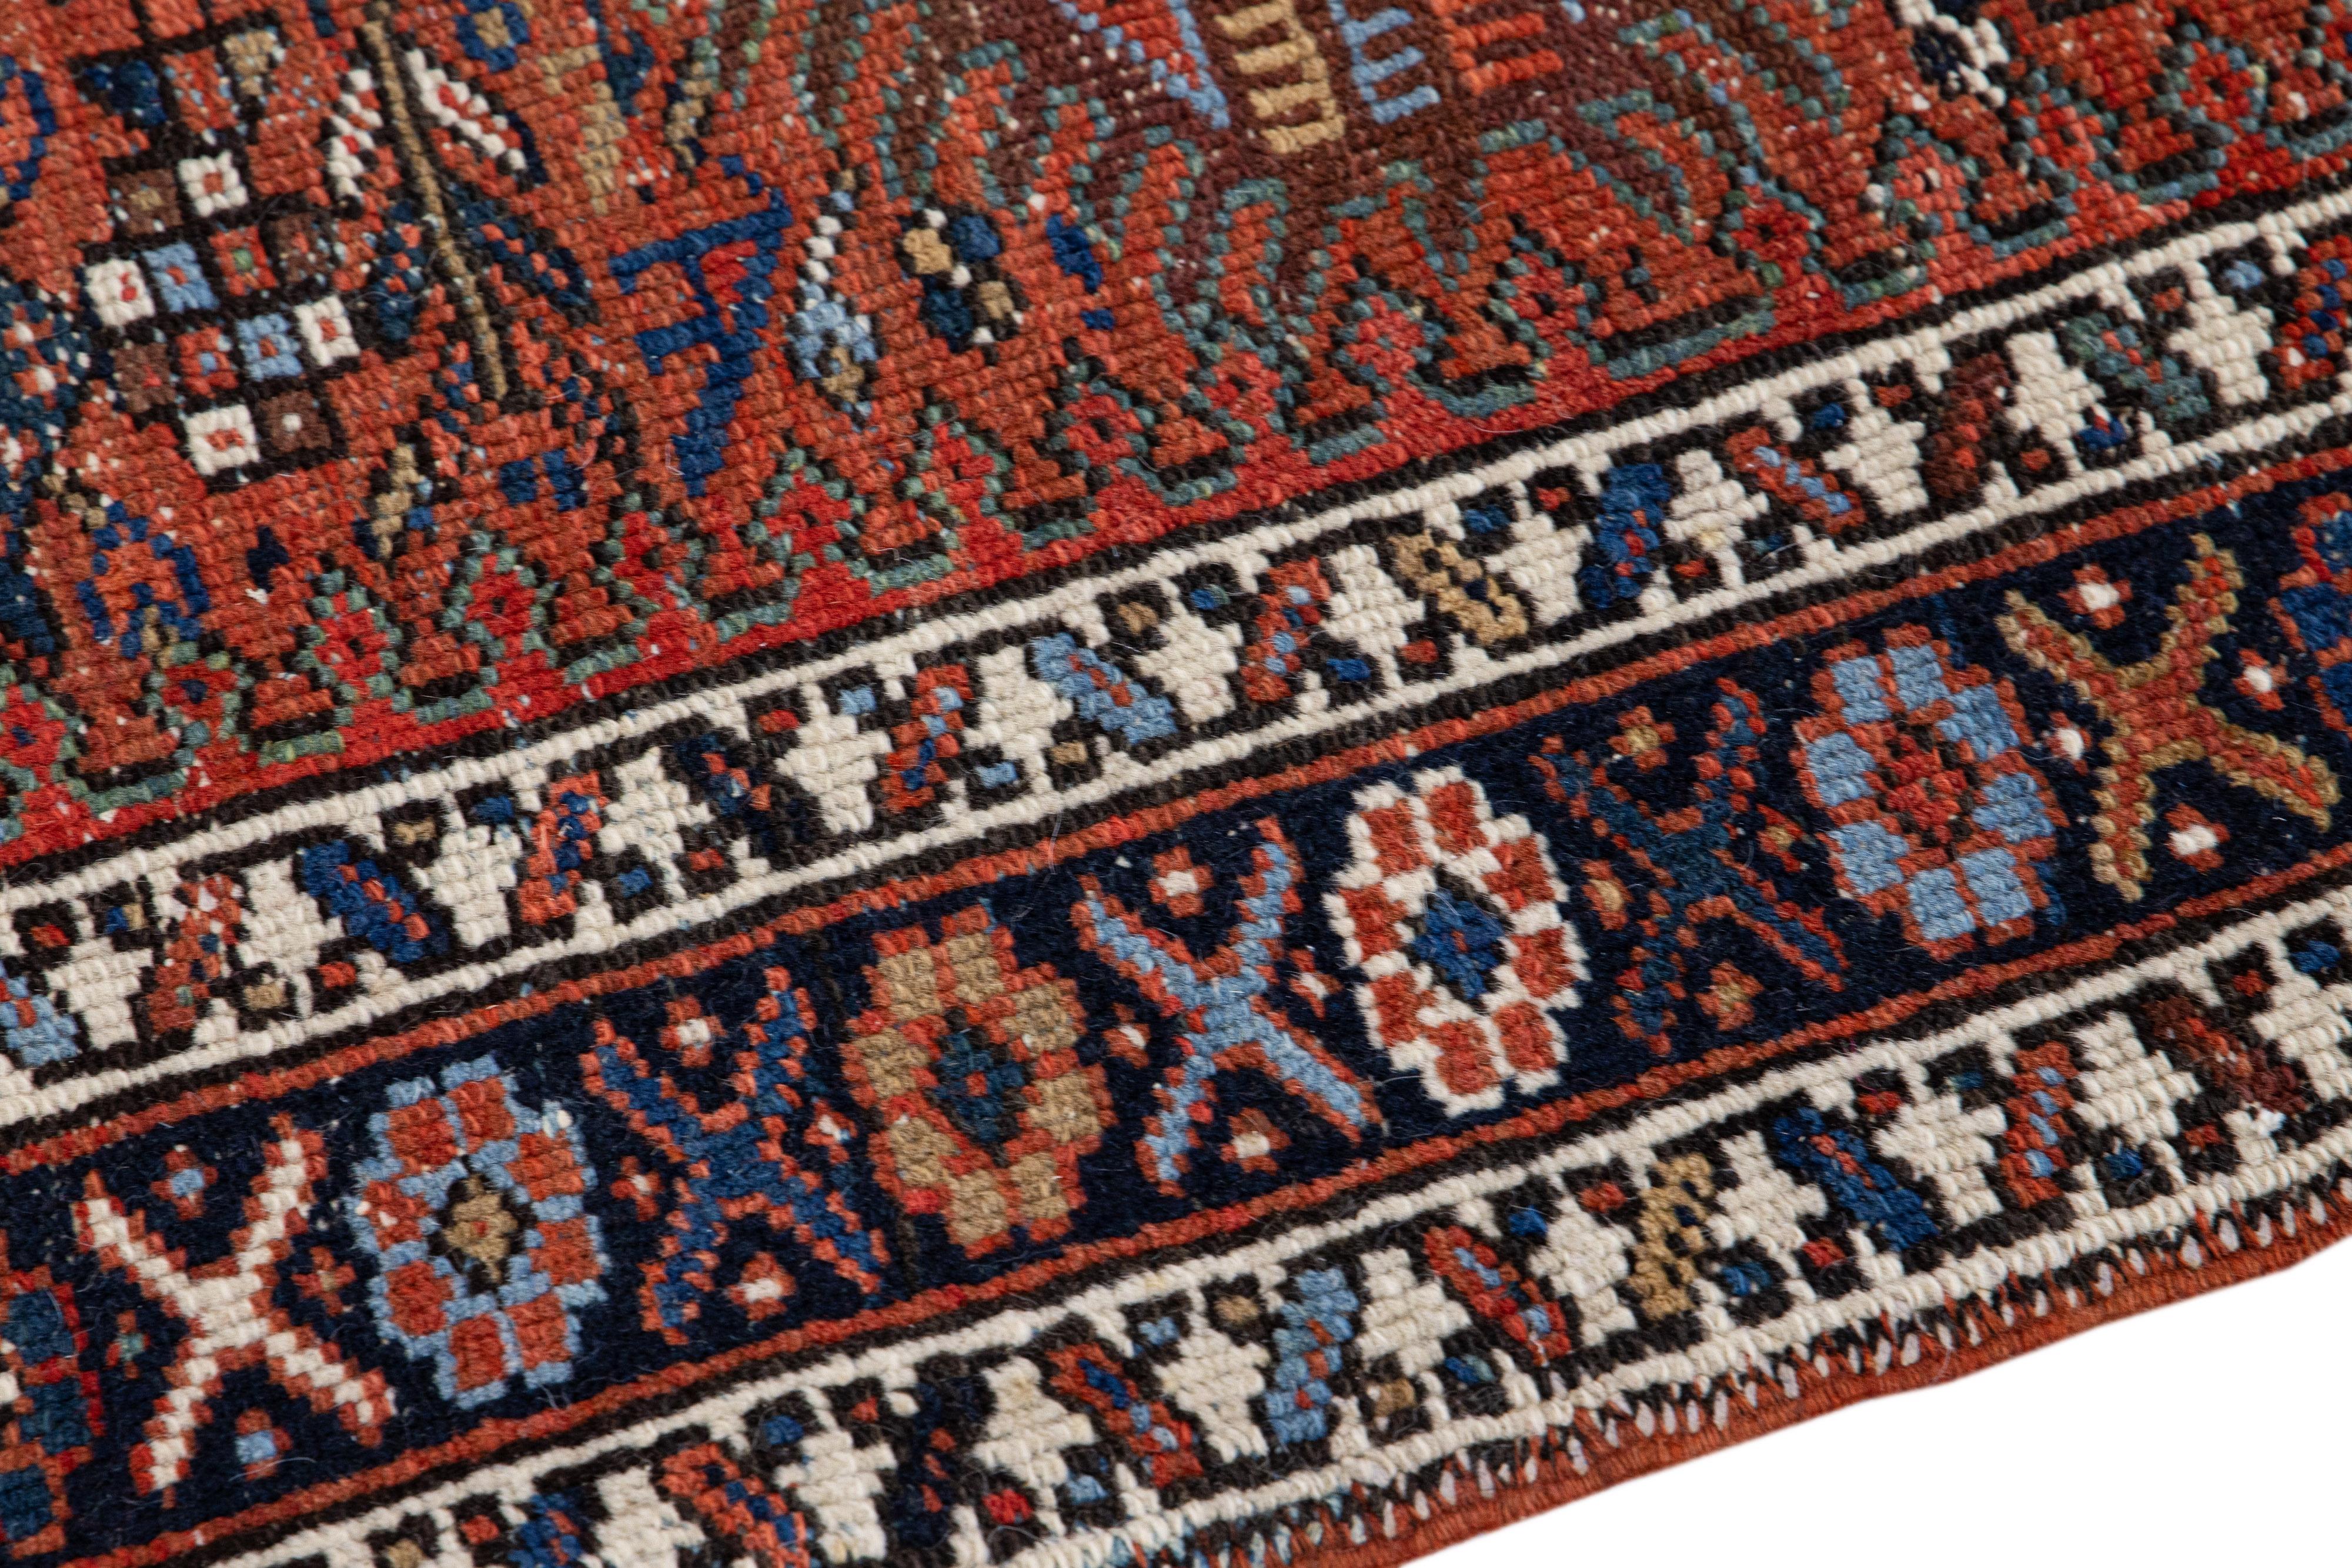 Beautiful vintage Karajah hand-knotted Wool rug with the red field. This Kalajah rug has multi-color accents in a gorgeous all-over geometric multi medallion design.

This rug measures: 3' x 10'8